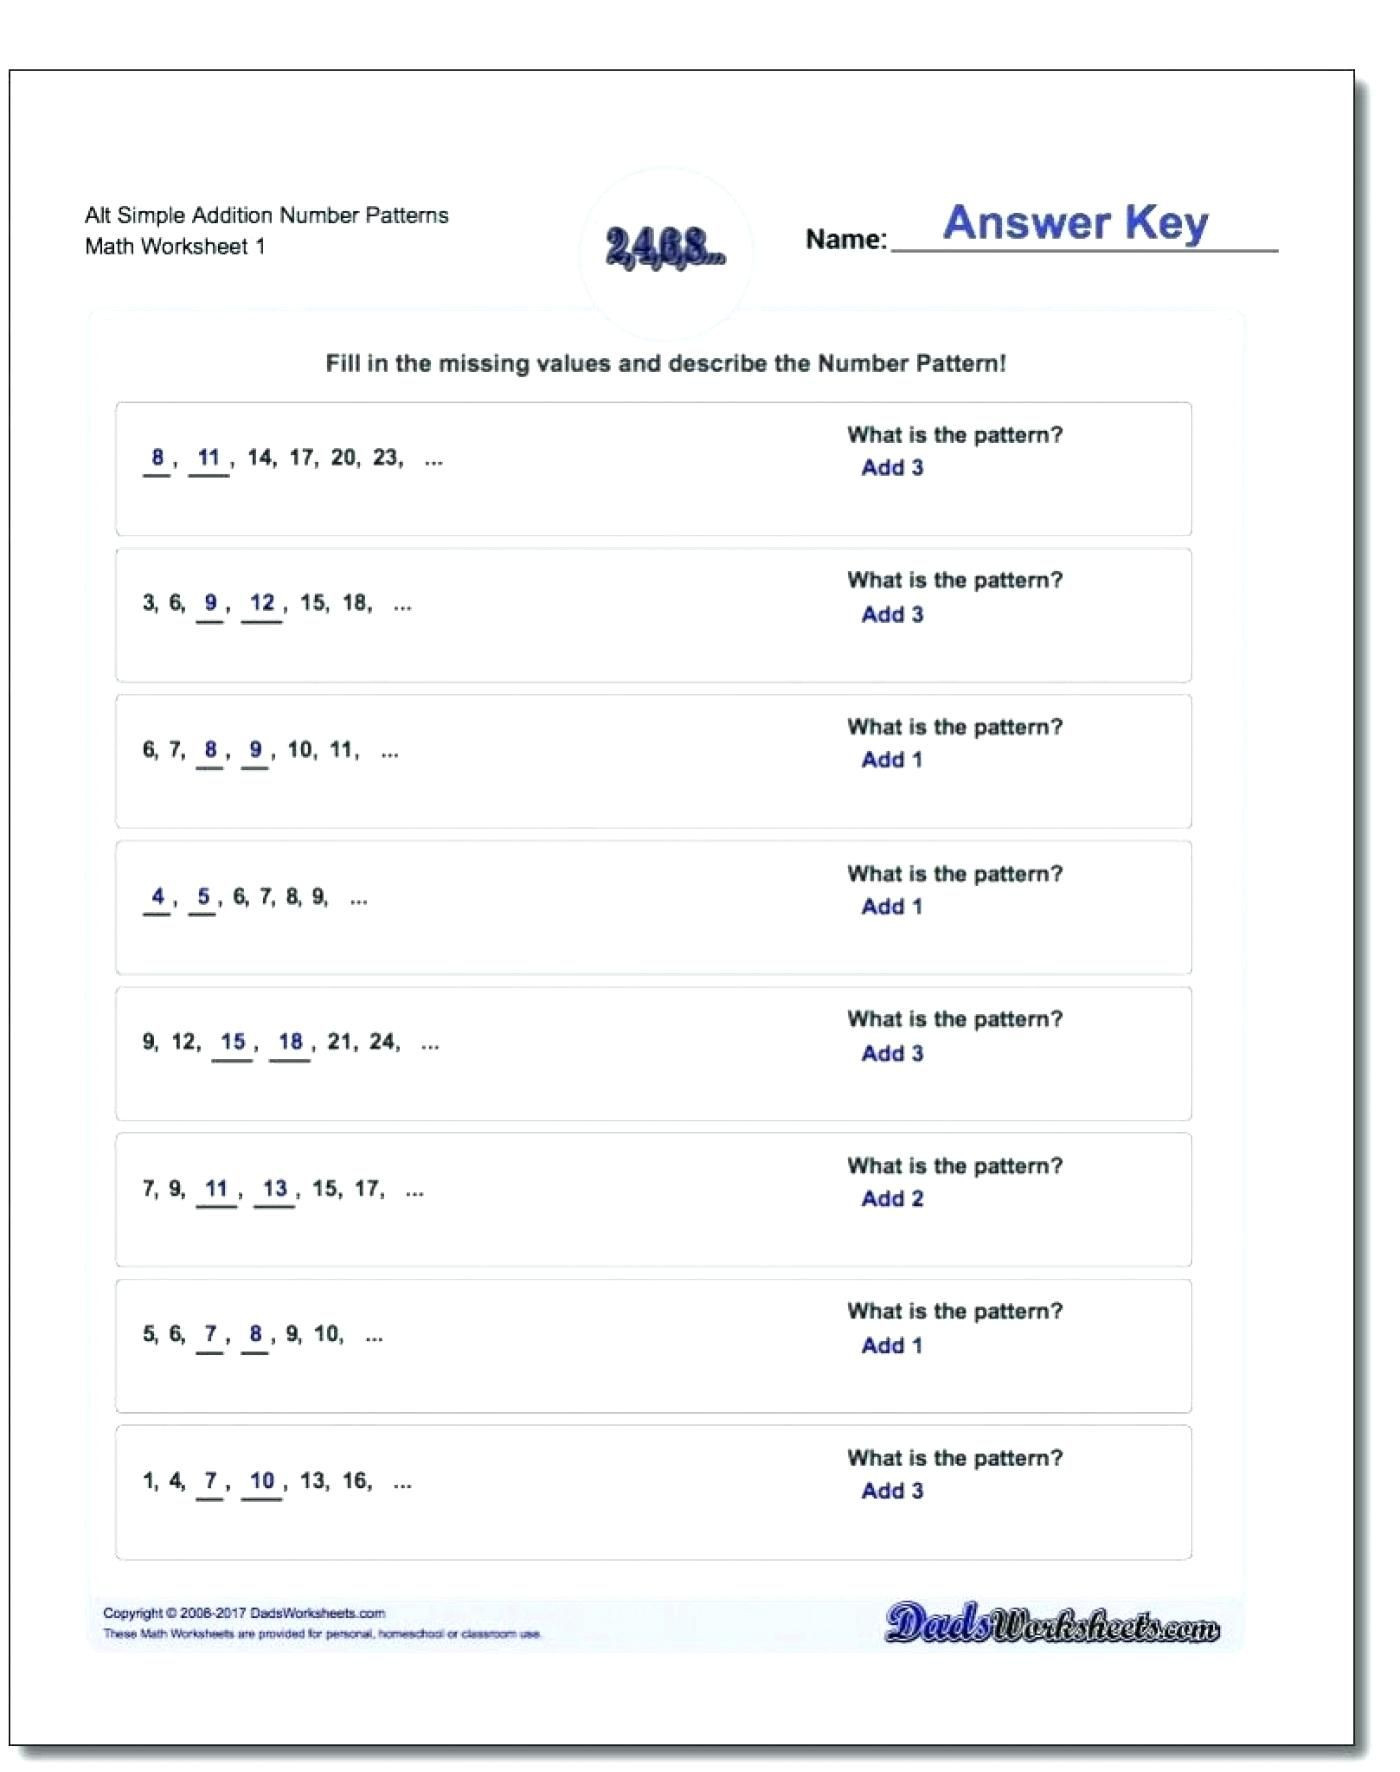 Scientific Notation Worksheet with Answers 42 Clever Scientific Notation Worksheet Ideas